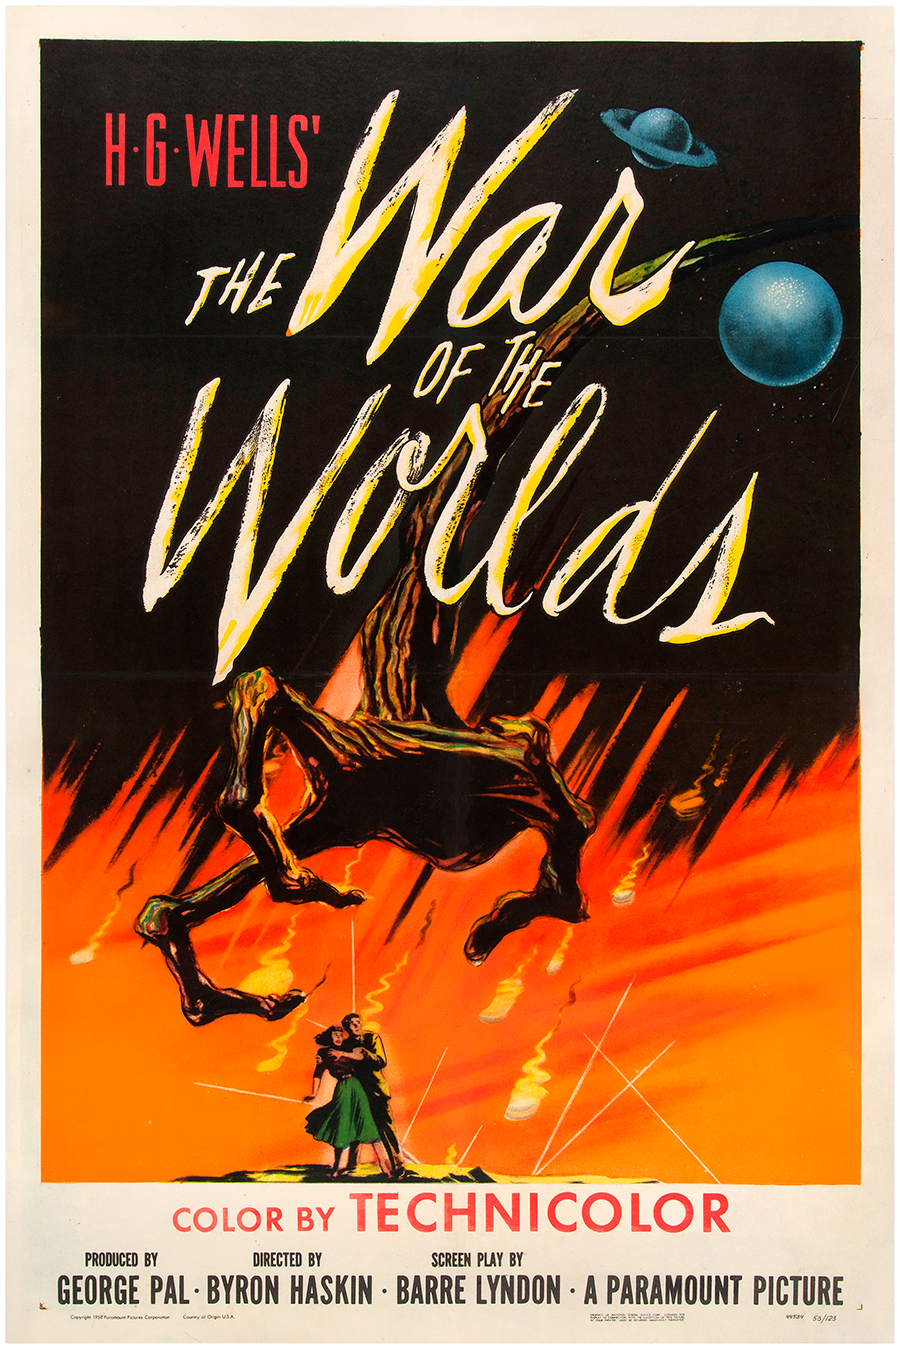 war of the worlds poster